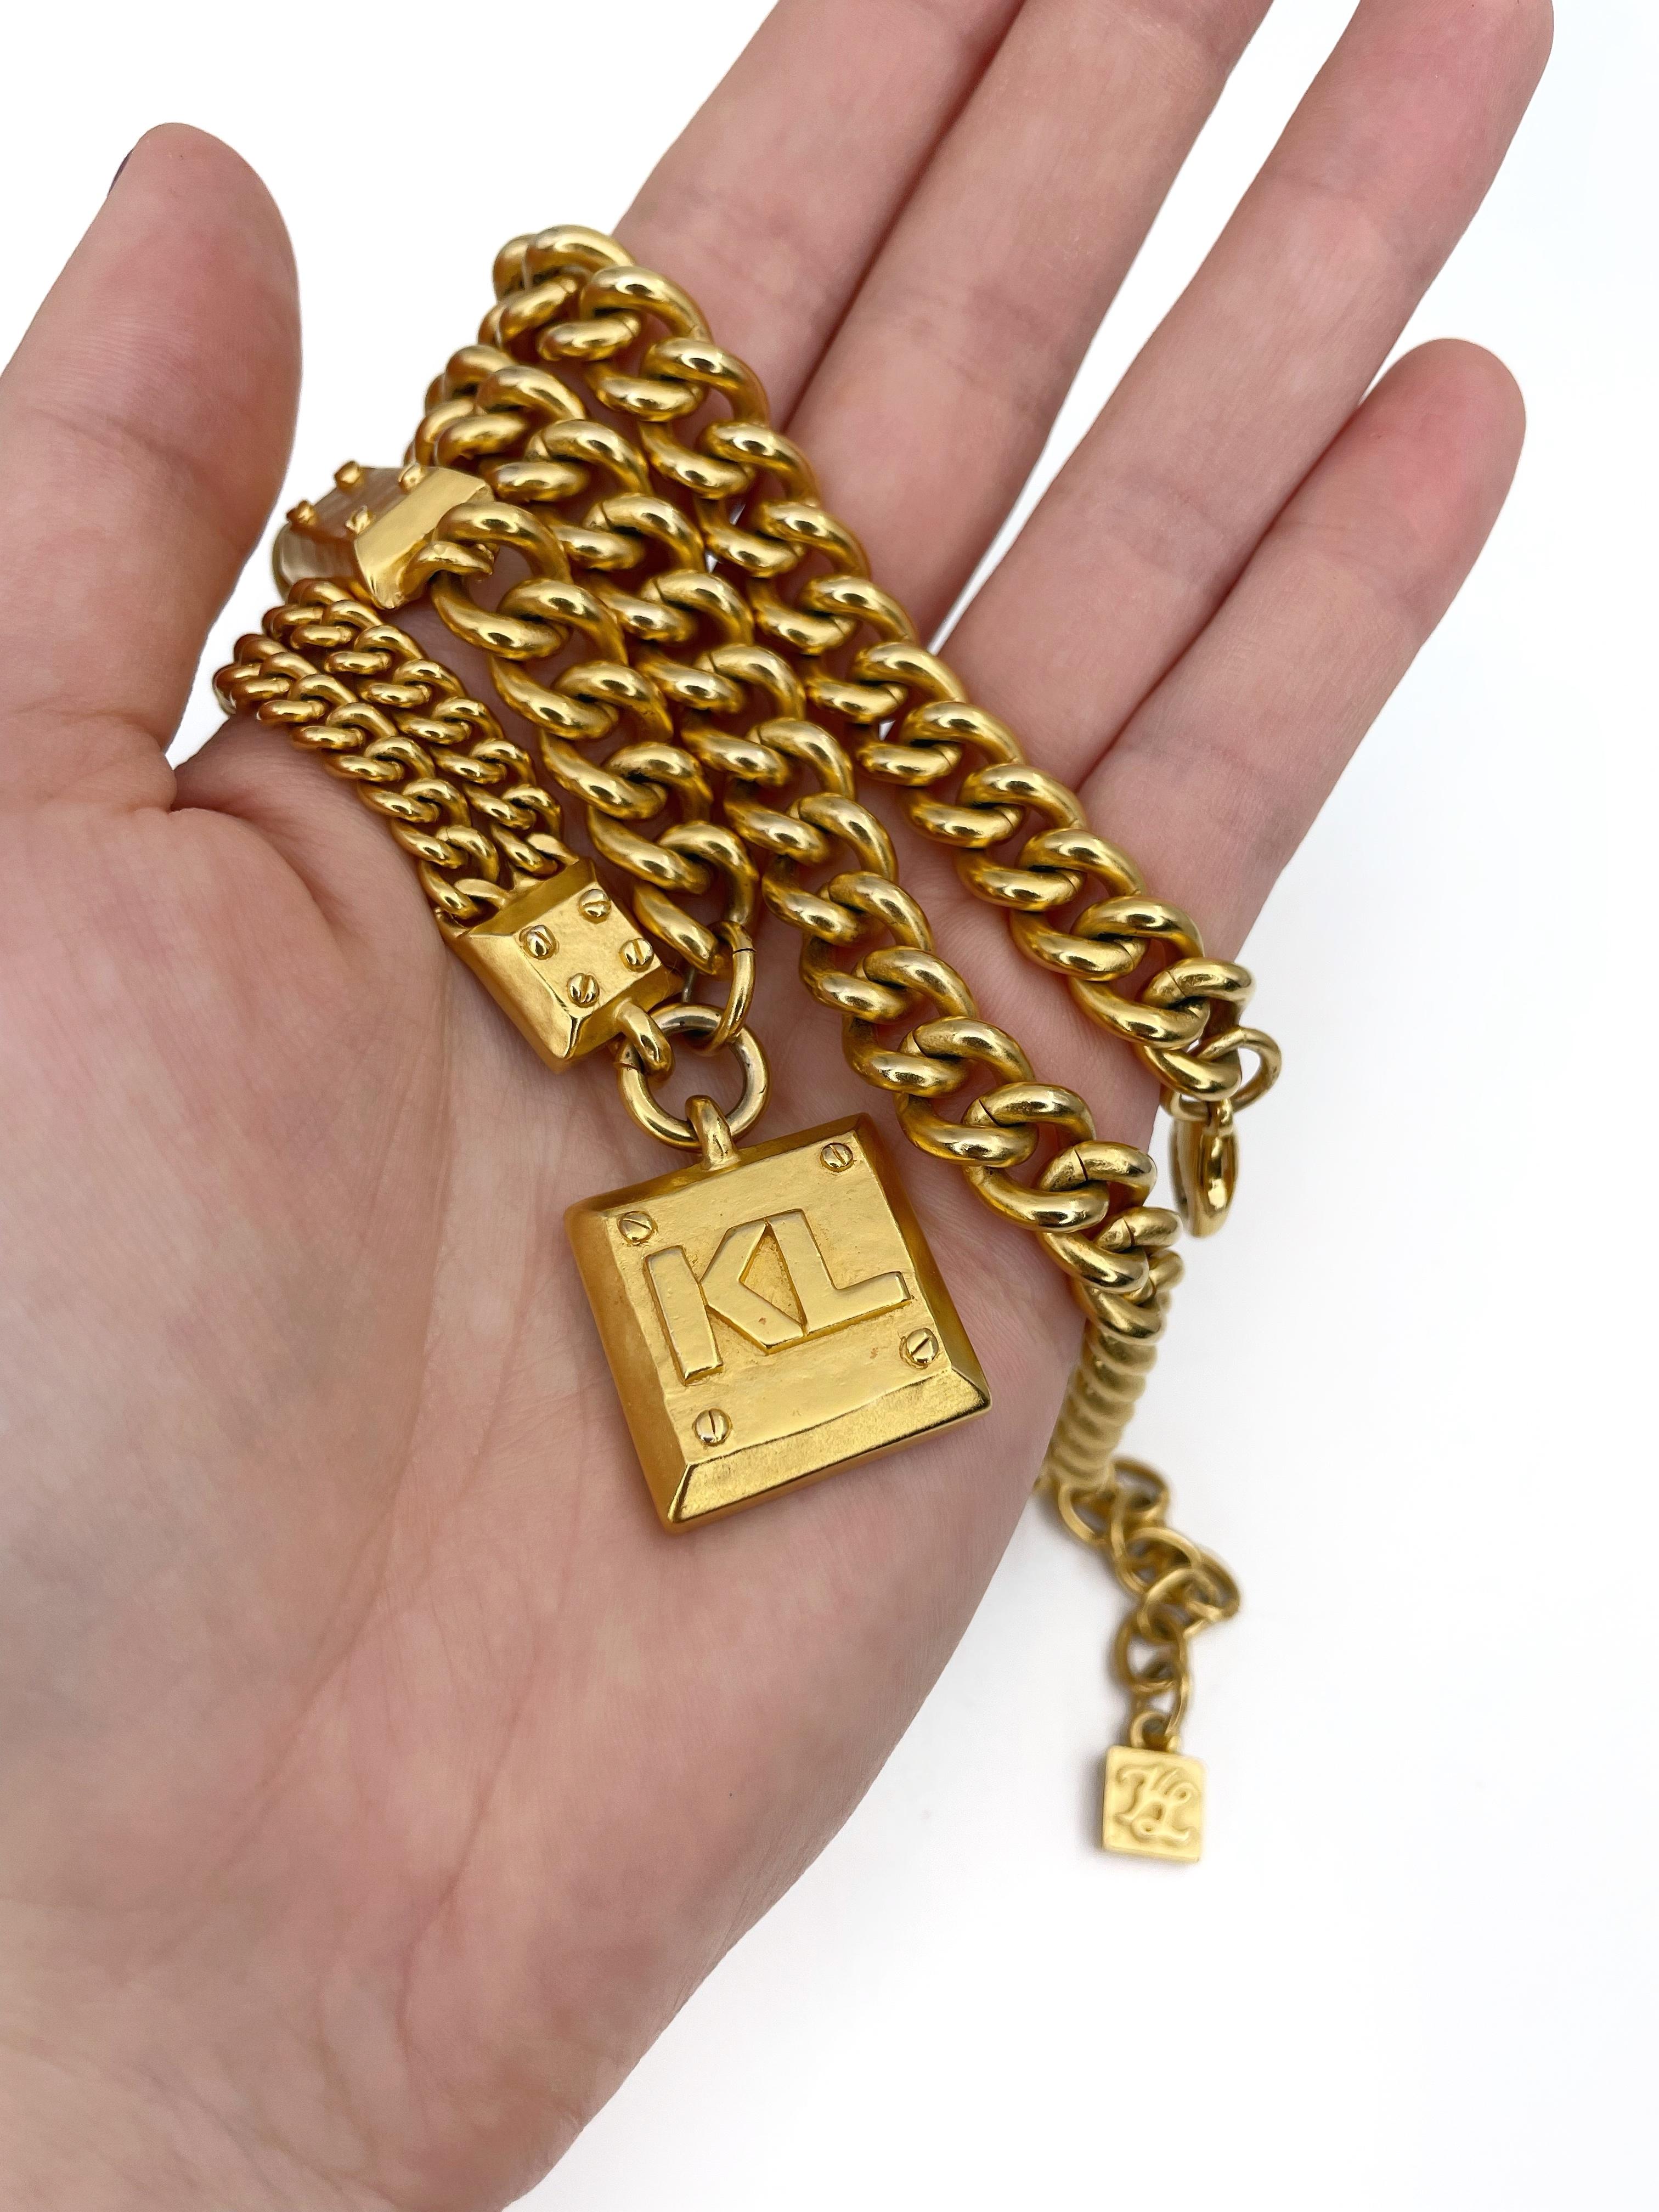 This is a beautiful and stylish massive chain necklace designed by Karl Lagerfeld in 1990’s. This piece is gold plated. The length can be adjusted to several options.

Signed: 